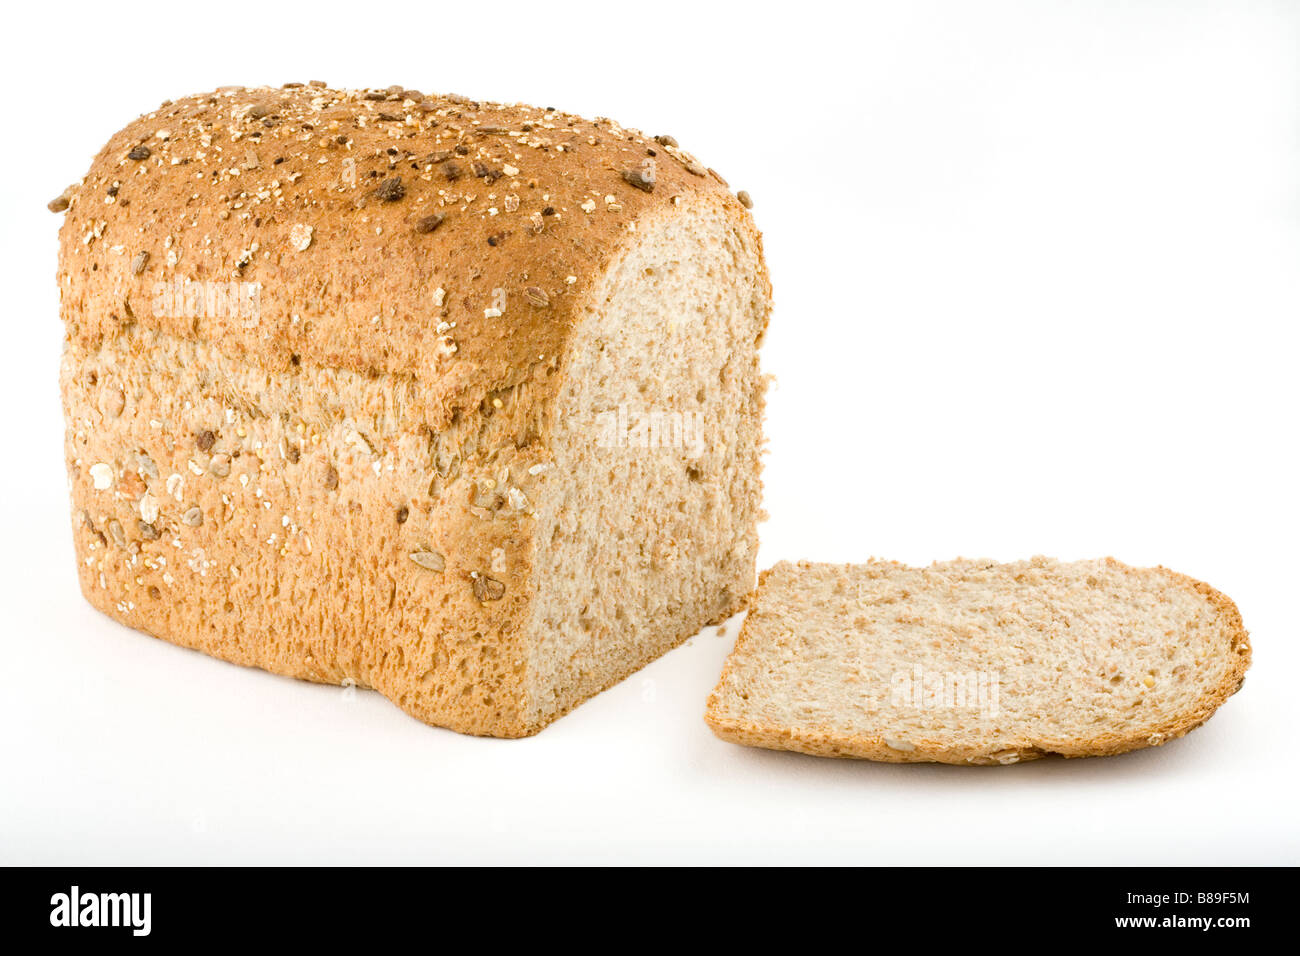 A loaf of wholemeal multigrain bread and slice Stock Photo